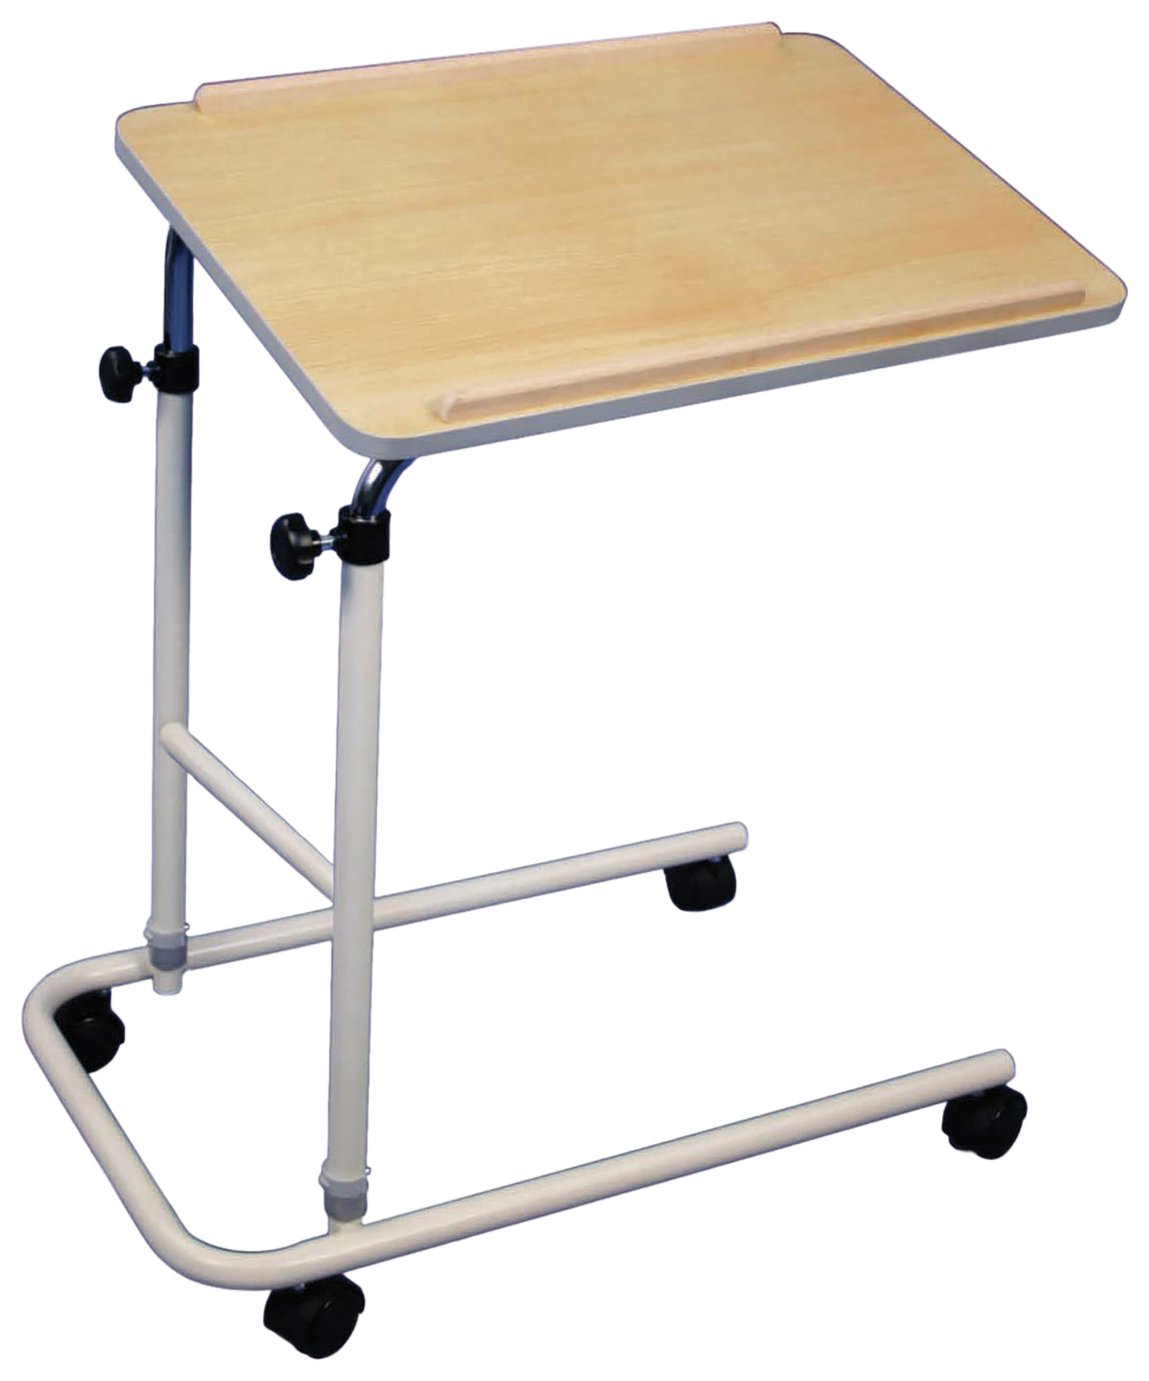 Aidapt Canterbury Multi Table With Castors review